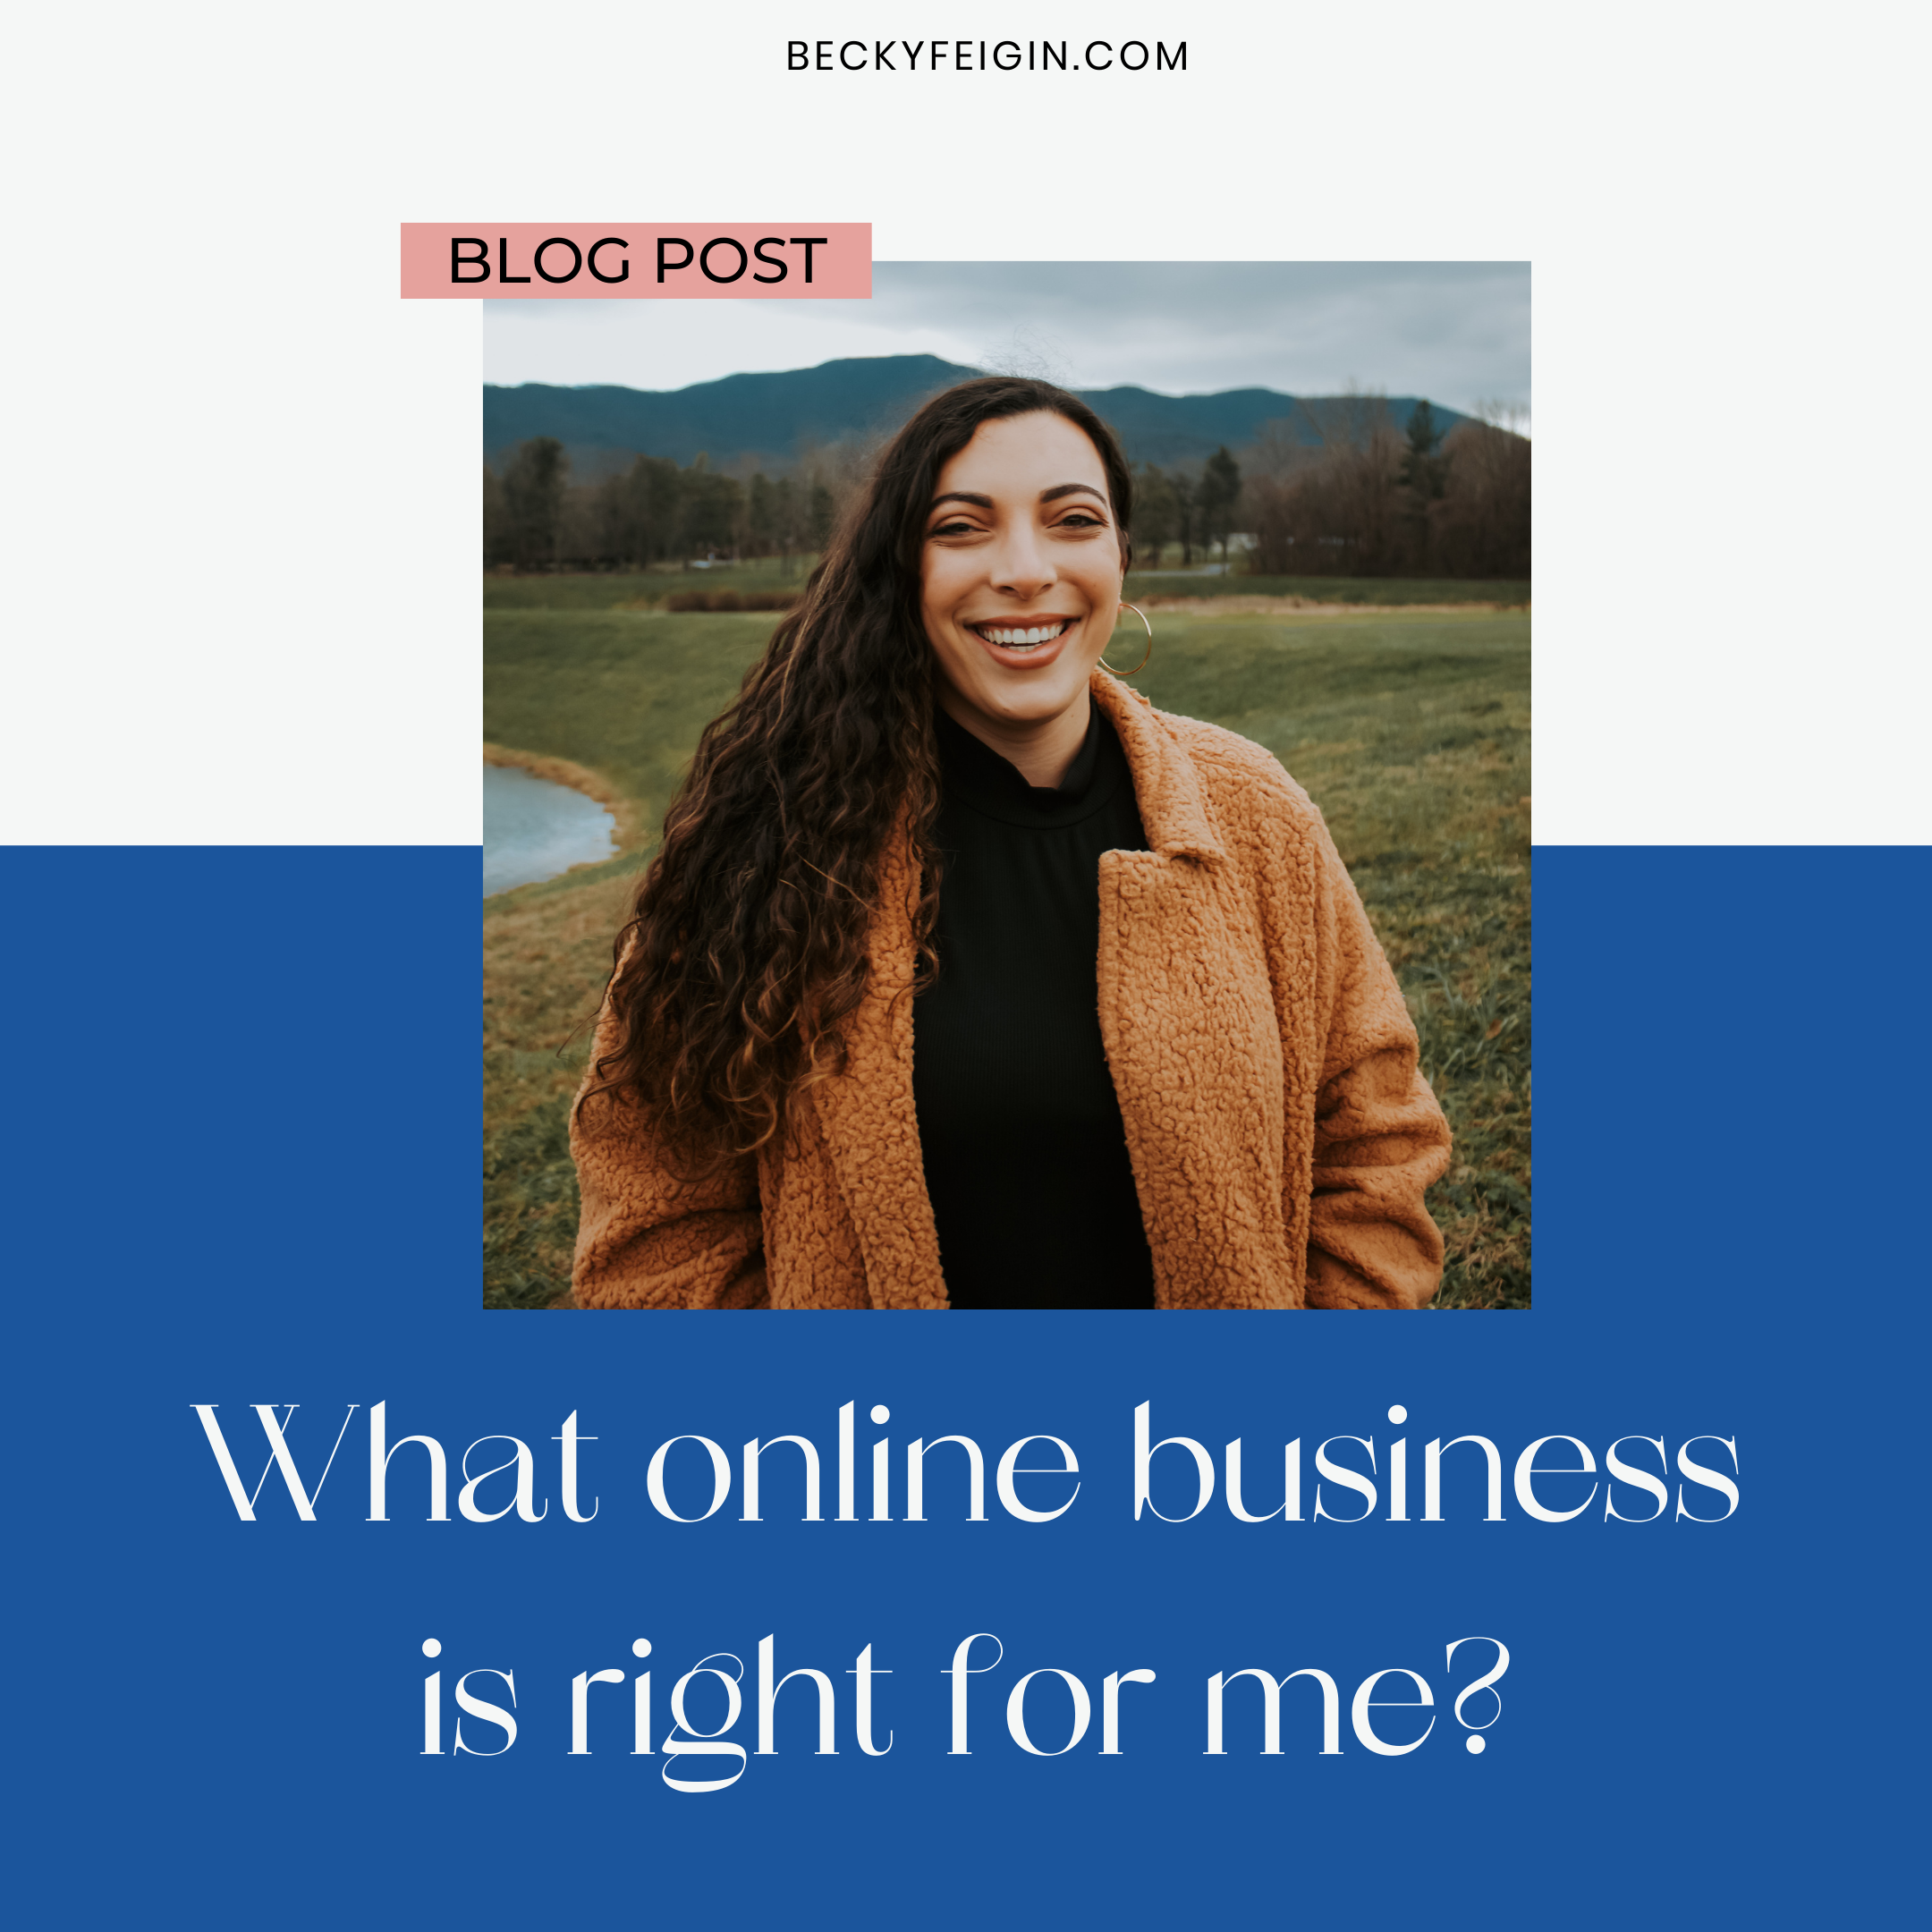 What online business is right for me?